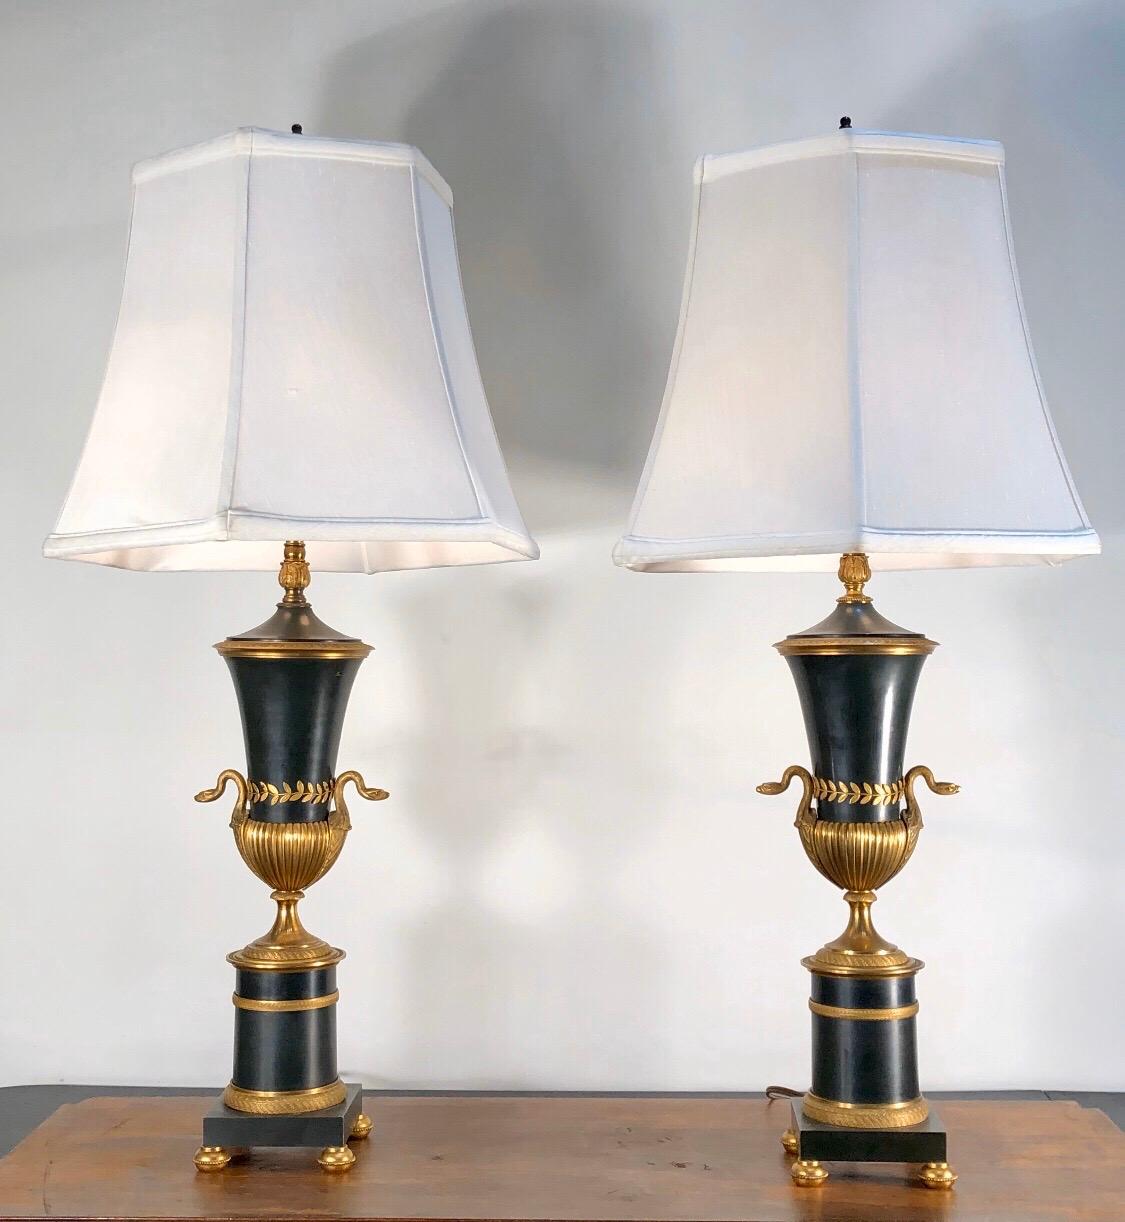 19th Century French Empire Lamps with Bronze Urns and Ormolu-Mounted Swans, Pair 7